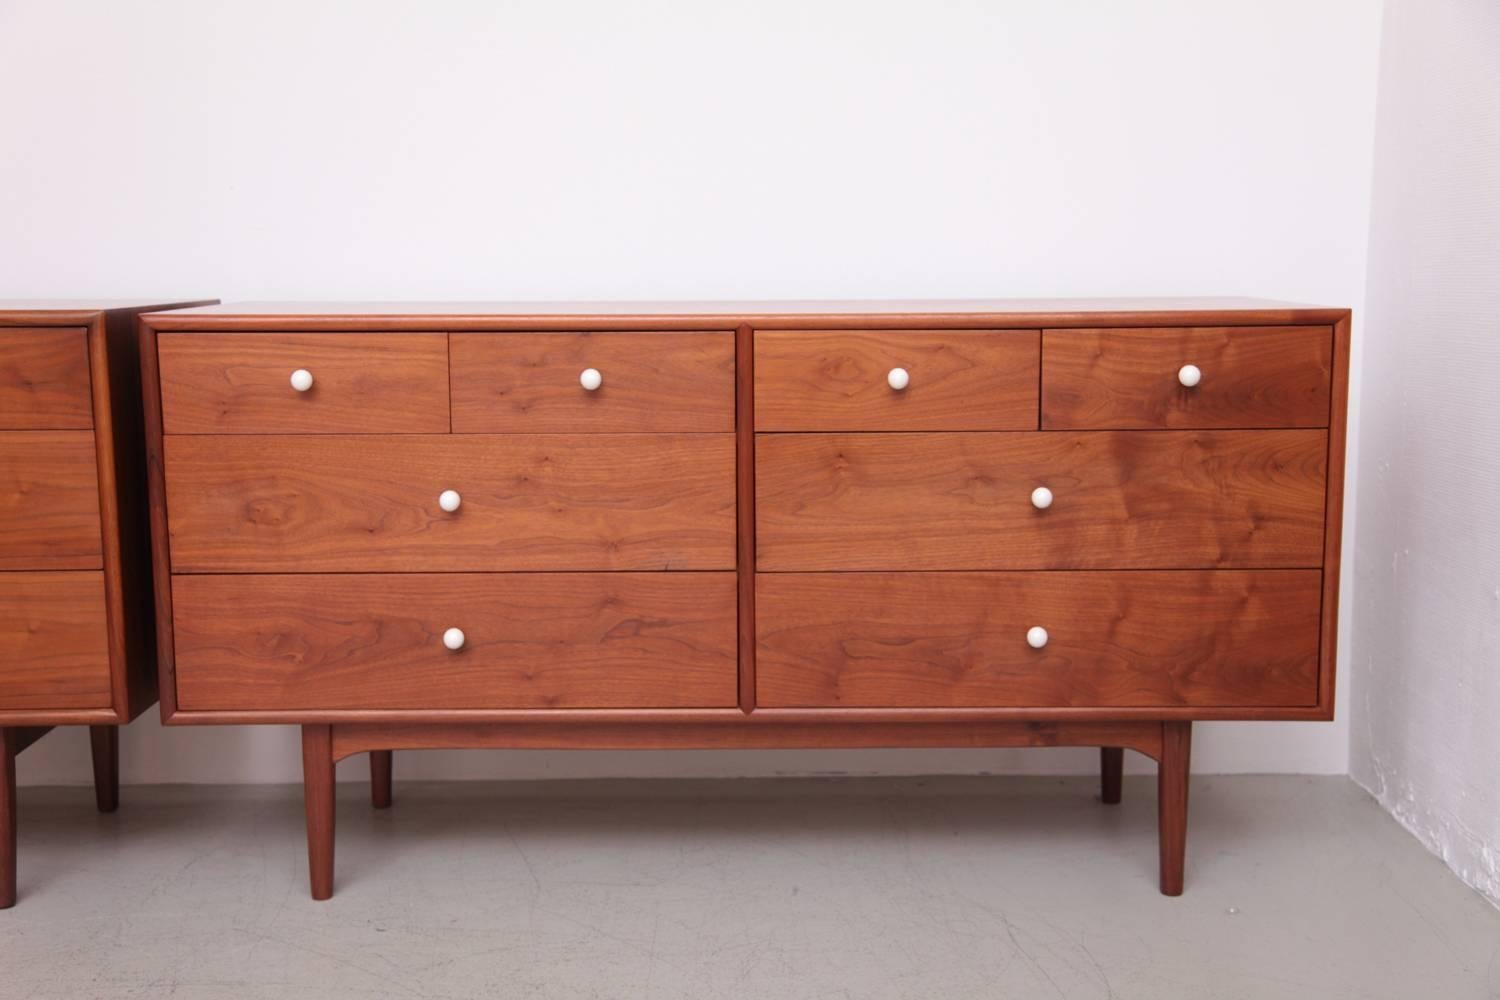 American Pair of Chest of Drawer Dressers in Walnut by Kipp Stewart for Drexel